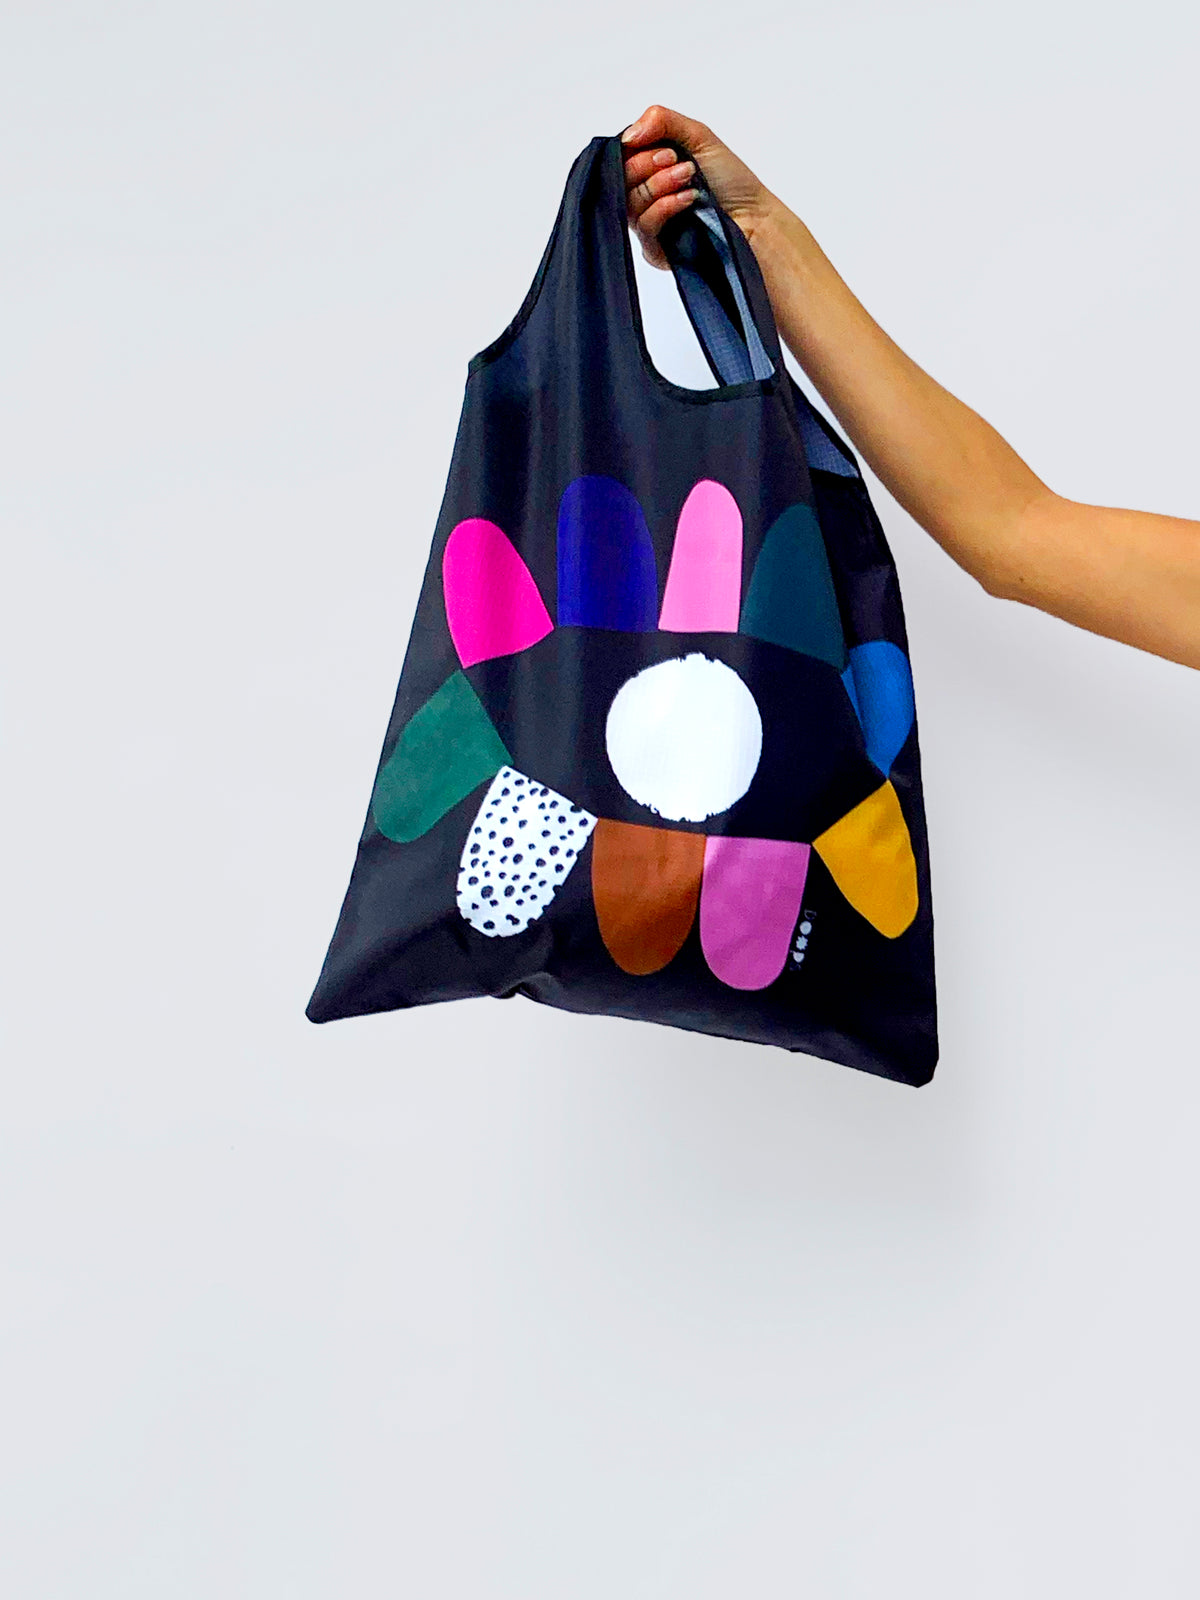 Blink Bag (comes with pouch) – doopsdesigns